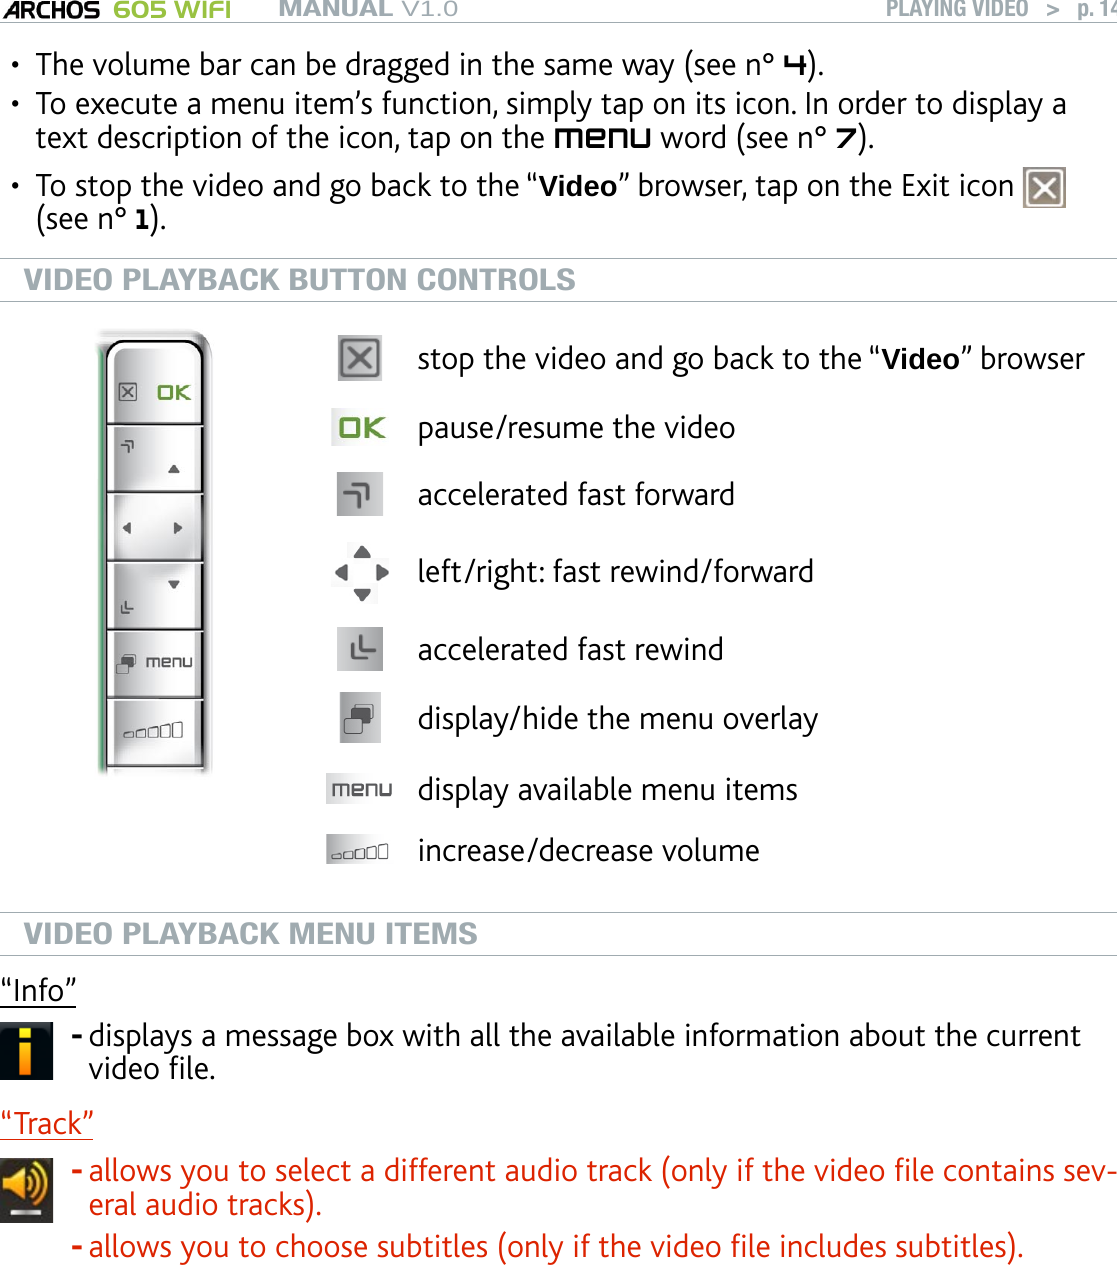 MANUAL V1.0 605 WIFI PLAYING VIDEO   &gt;   p. 14The volume bar can be dragged in the same way (see n° 4).To execute a menu item’s function, simply tap on its icon. In order to display a text description of the icon, tap on the menu word (see n° 7).To stop the video and go back to the “Video” browser, tap on the Exit icon   (see n° 1). VIDEO PLAYBACK BUTTON CONTROLSstop the video and go back to the “Video” browserpause/resume the videoaccelerated fast forward left/right: fast rewind/forwardaccelerated fast rewinddisplay/hide the menu overlaydisplay available menu itemsincrease/decrease volumeVIDEO PLAYBACK MENU ITEMS“Info”displays a message box with all the available information about the current video le.-“Track” allows you to select a different audio track (only if the video le contains sev-eral audio tracks).allows you to choose subtitles (only if the video le includes subtitles).--“Track” only appears in the menu if the video le includes subtitles or several audio tracks.•••